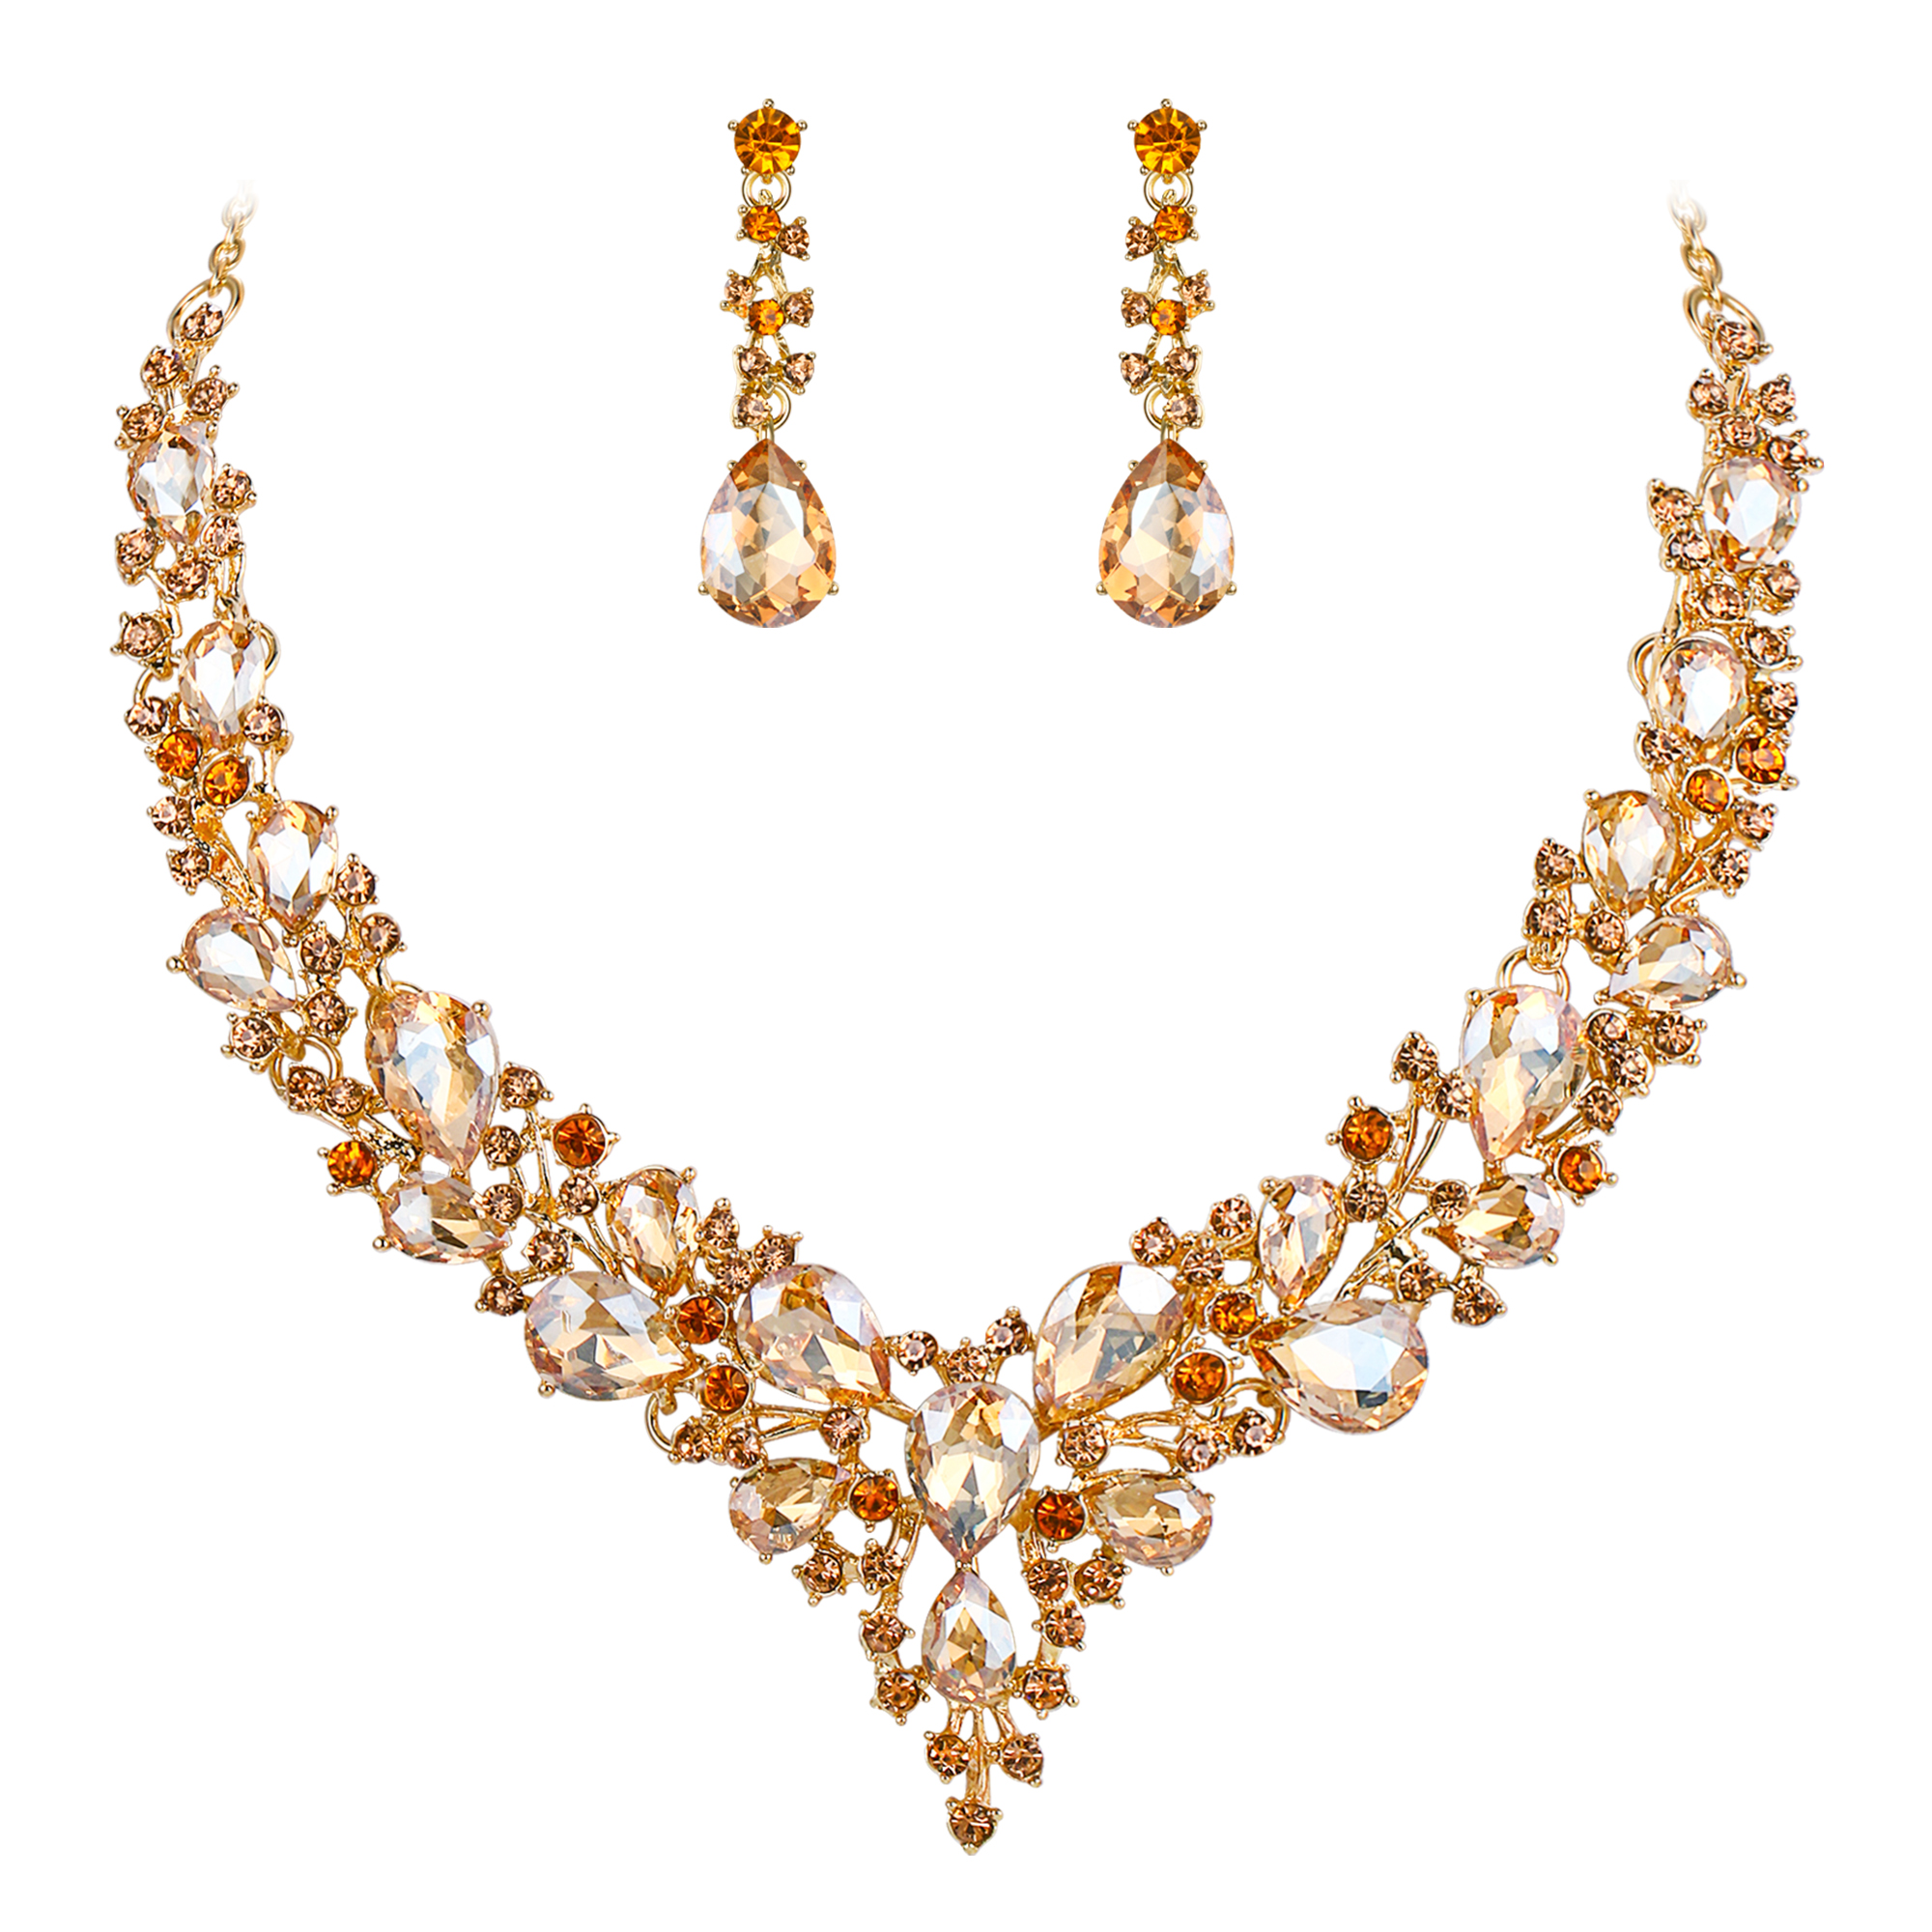 Wedure Wedding Bridal Necklace Earrings Jewelry Set for Women,, Austrian Crystal Teardrop Cluster Statement Necklace Dangle Earrings Set Champagne Gold-Toned - image 1 of 5